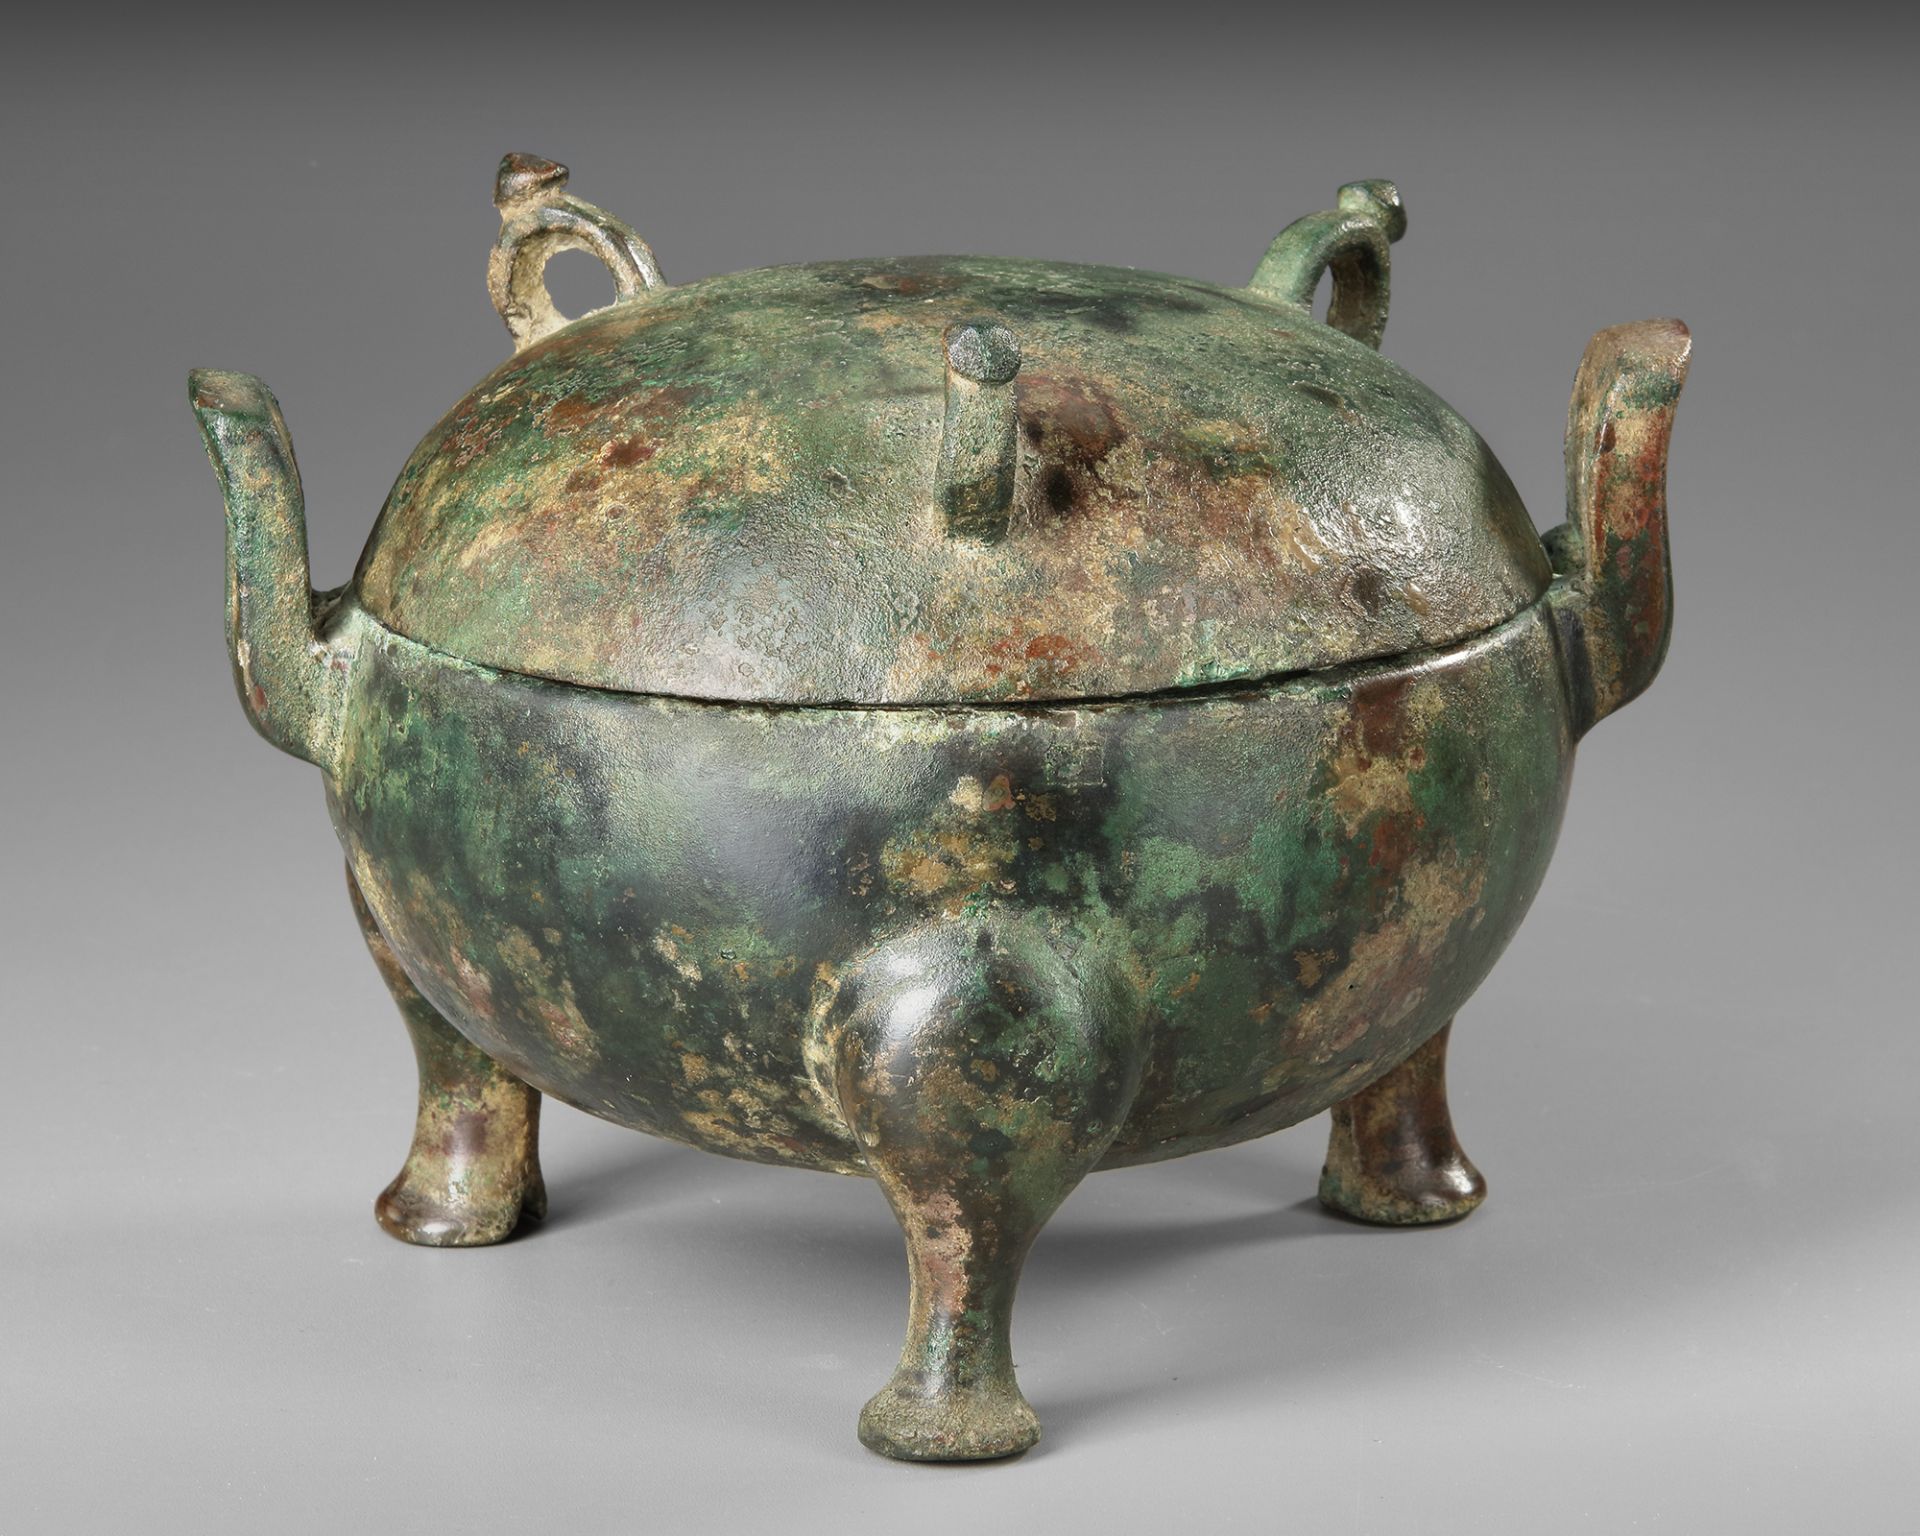 A CHINESE BRONZE TRIPOD STORAGE VESSEL AND AN ASSOCIATED COVER, DING, SON/MING DYNASTY